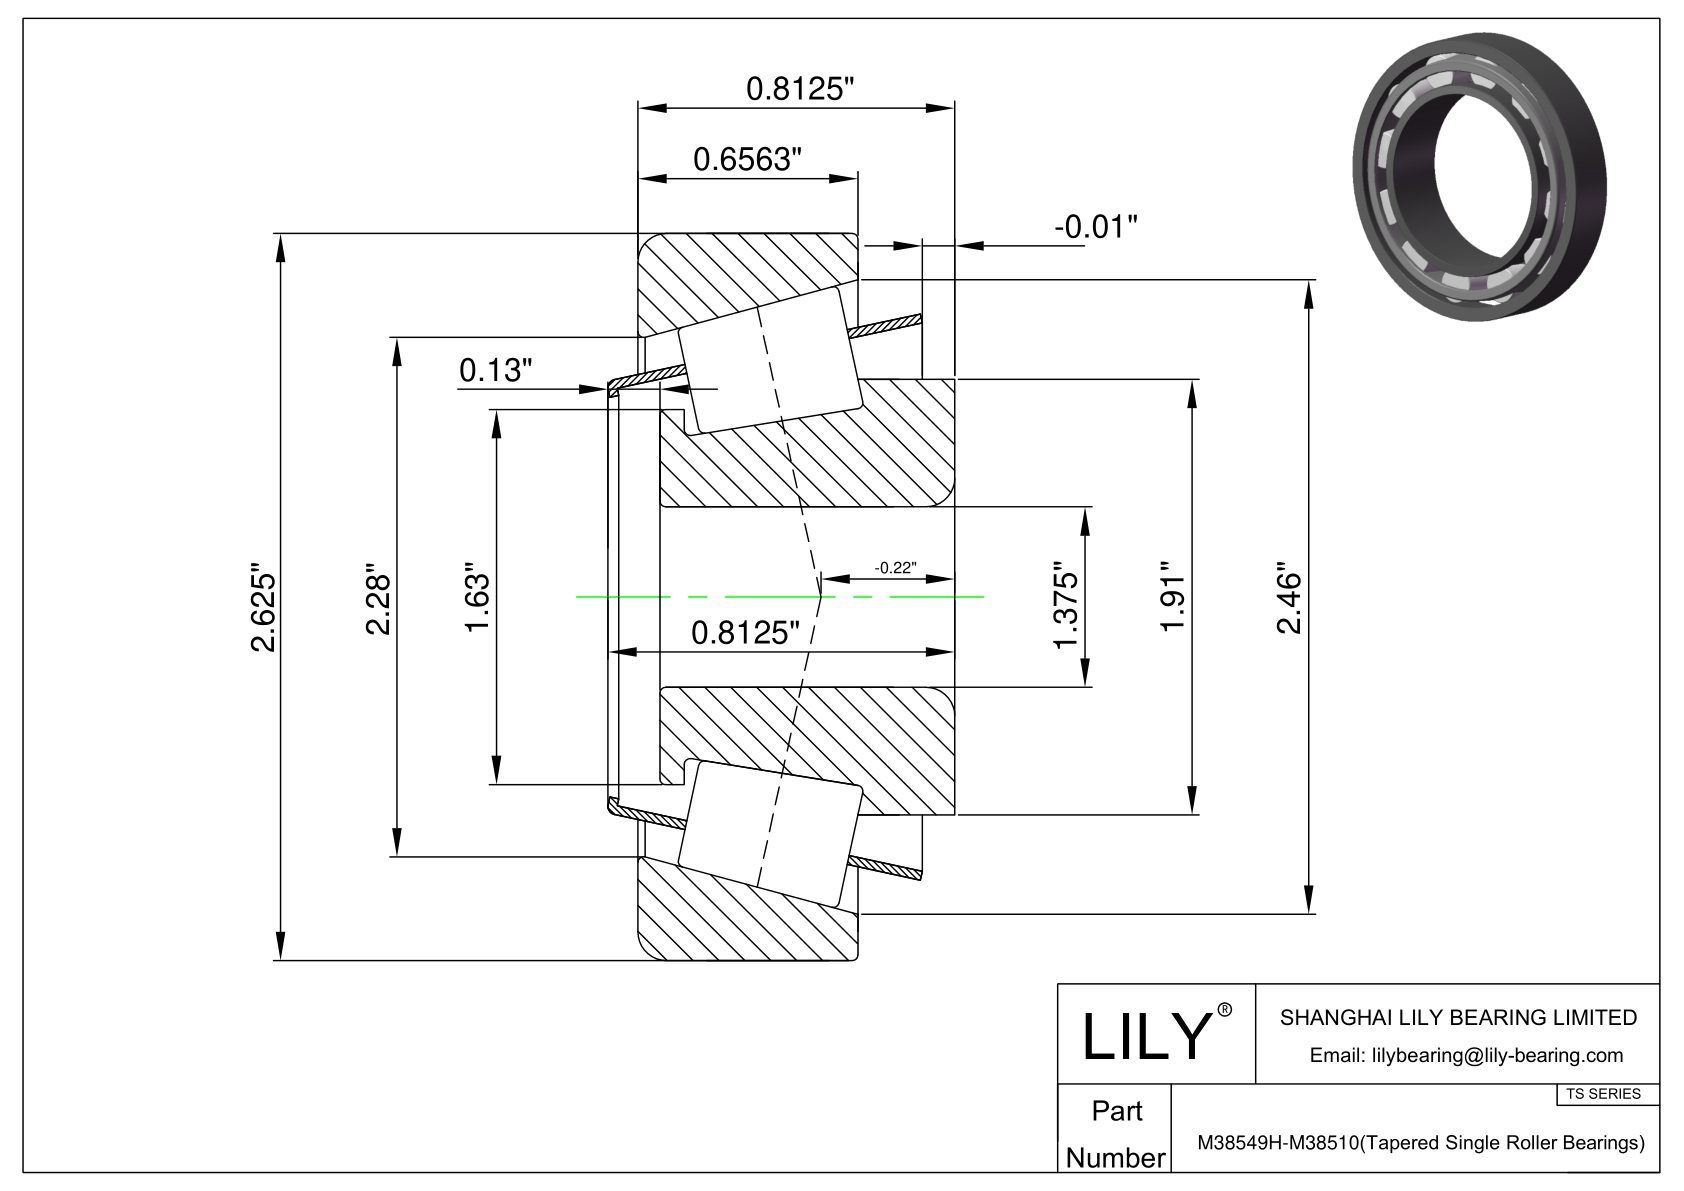 M38549H-M38510 TS (Tapered Single Roller Bearings) (Imperial) cad drawing